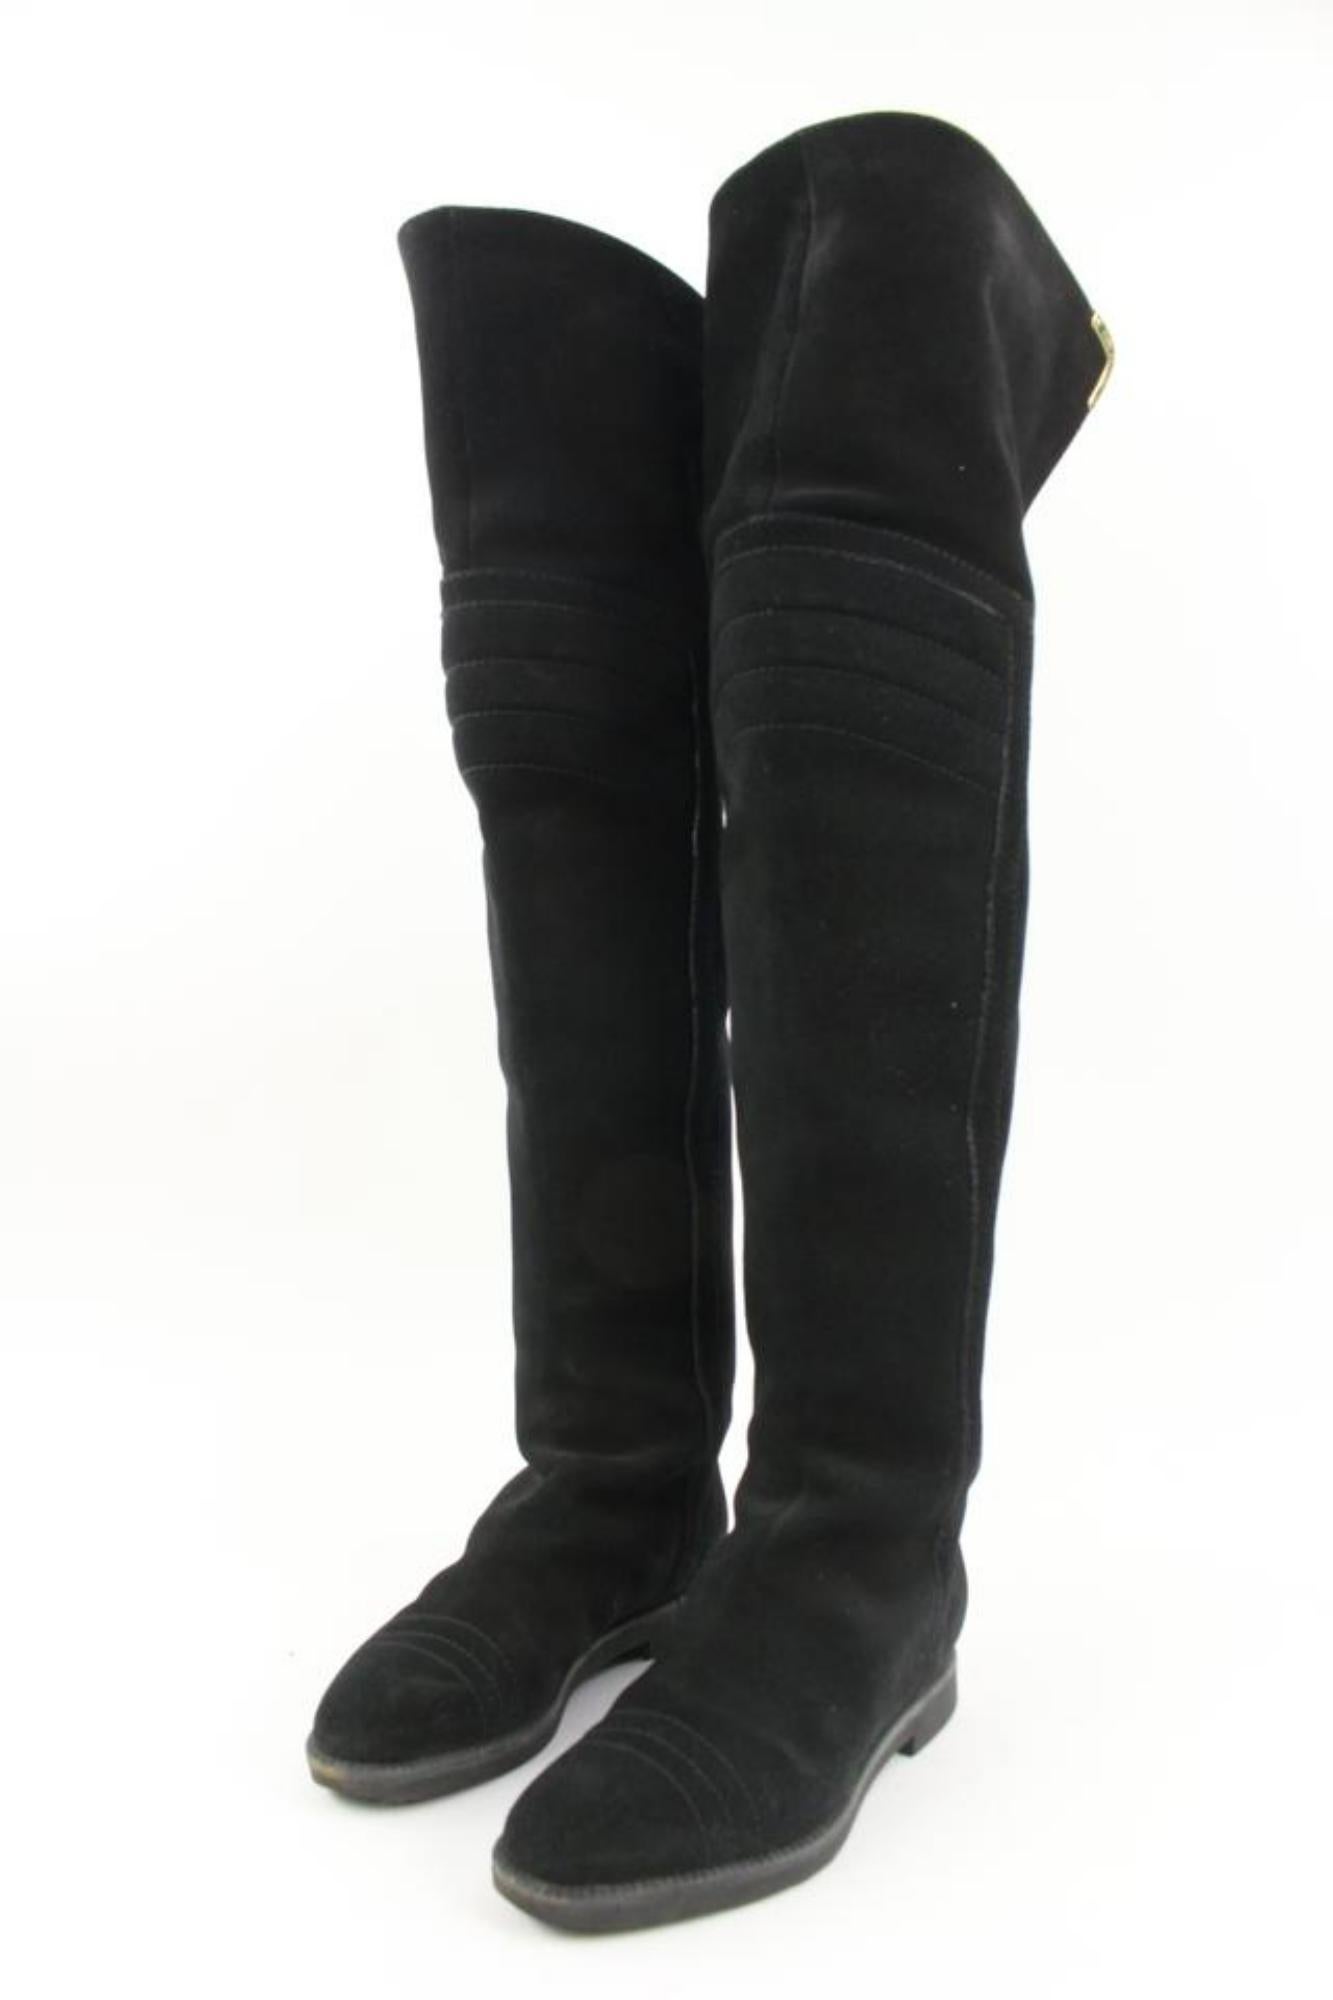 Louis Vuitton Black Suede And Patent Leather Knee Length Boots Size 37  Louis Vuitton